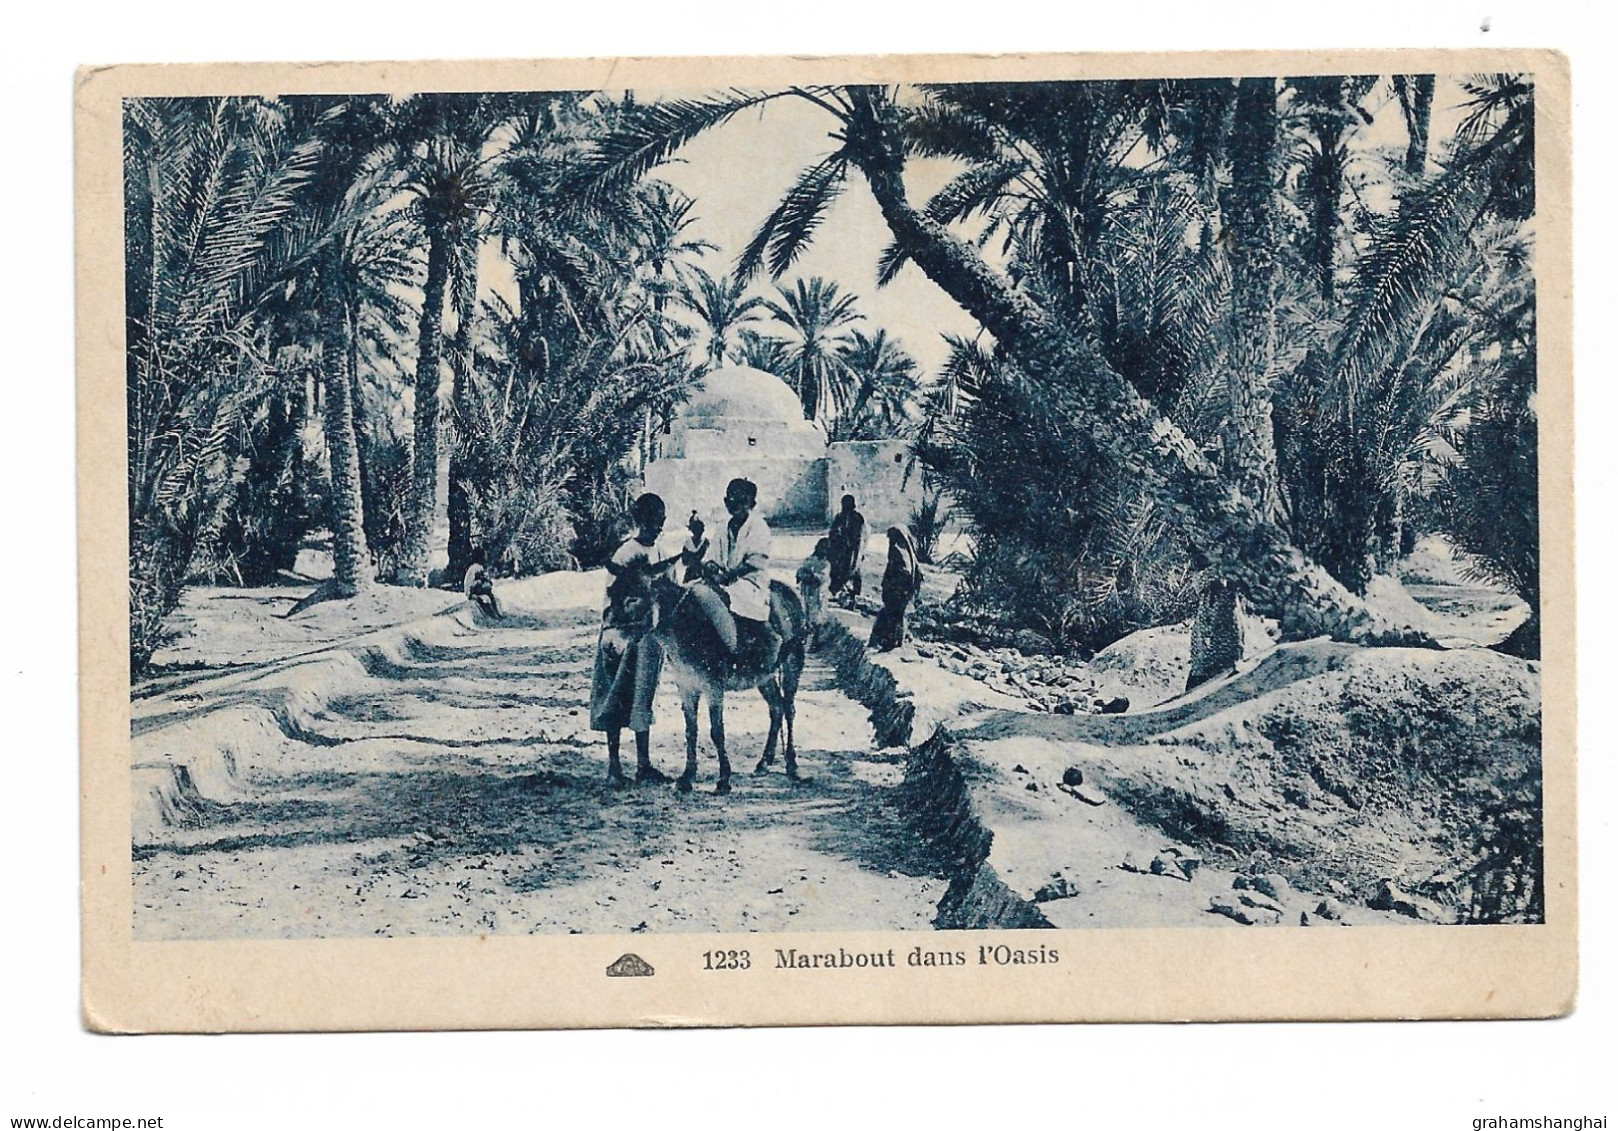 Postcard Tunisia Marabout Dans L'Oasis 1943 British Army Field Post Office FPO255 1 Infantry Division WW2 Gilbert Lewis - Guerre 1939-45